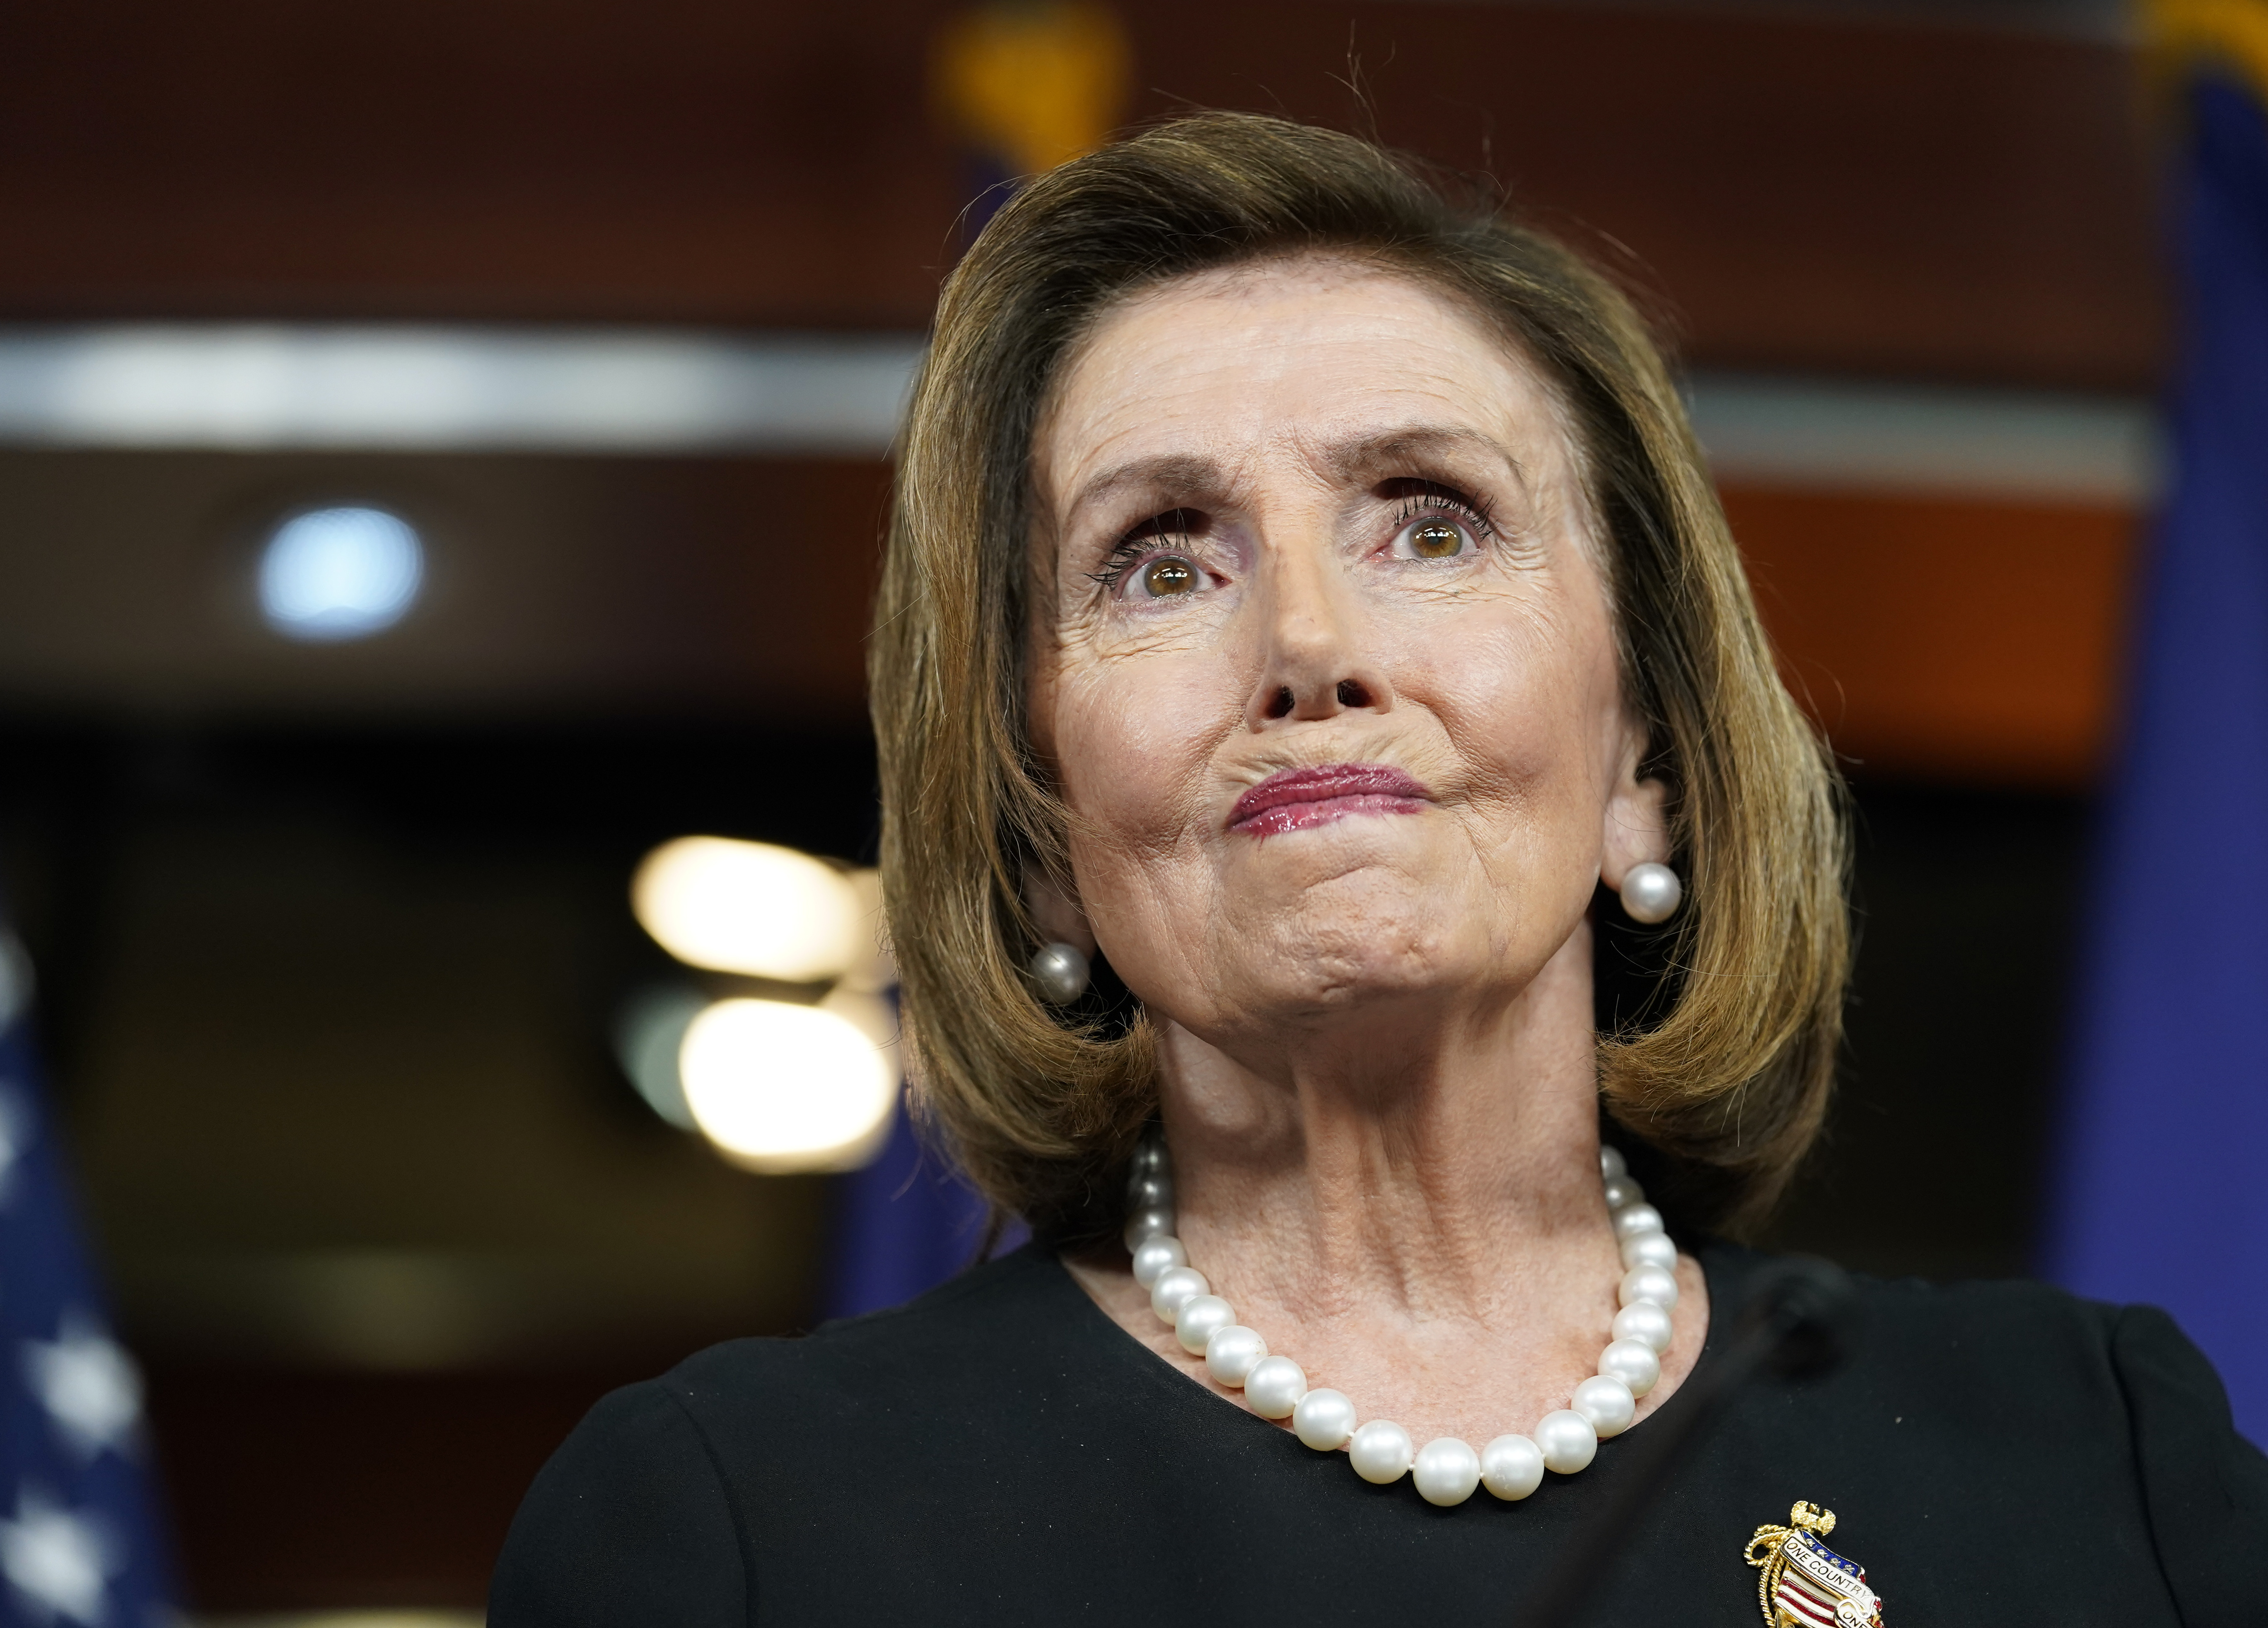 House Speaker Nancy Pelosi of Calif., speaks at her weekly press conference, Thursday, July 14, 2022, on Capitol Hill in Washington. (AP Photo/Mariam Zuhaib)